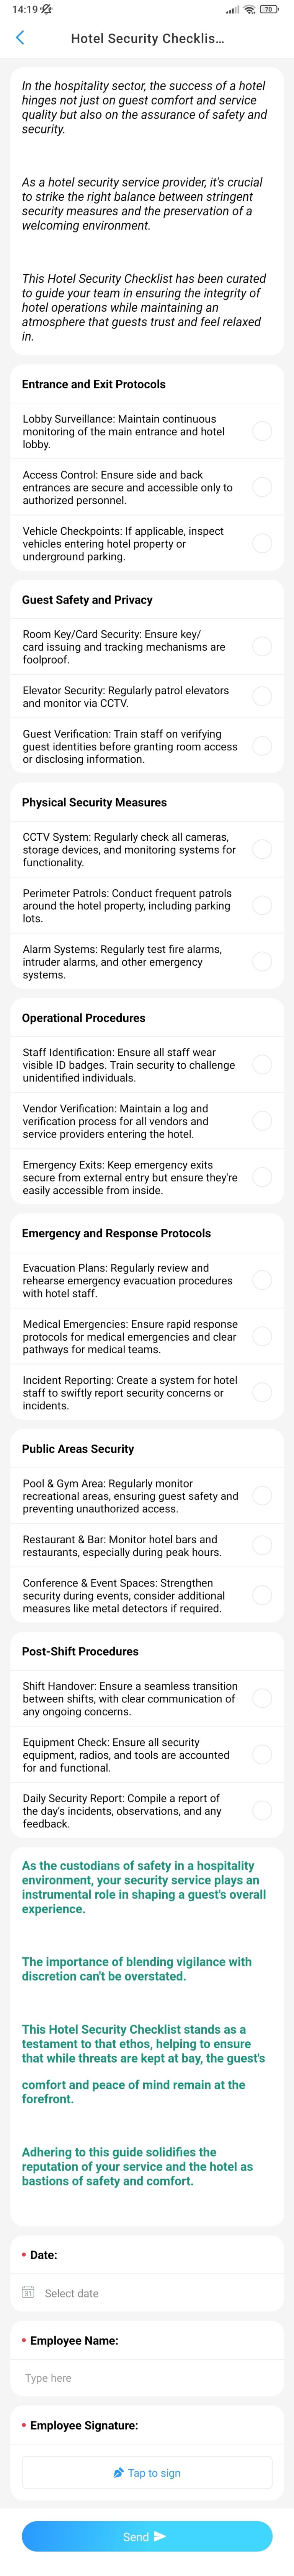 Hotel Security Checklist Template